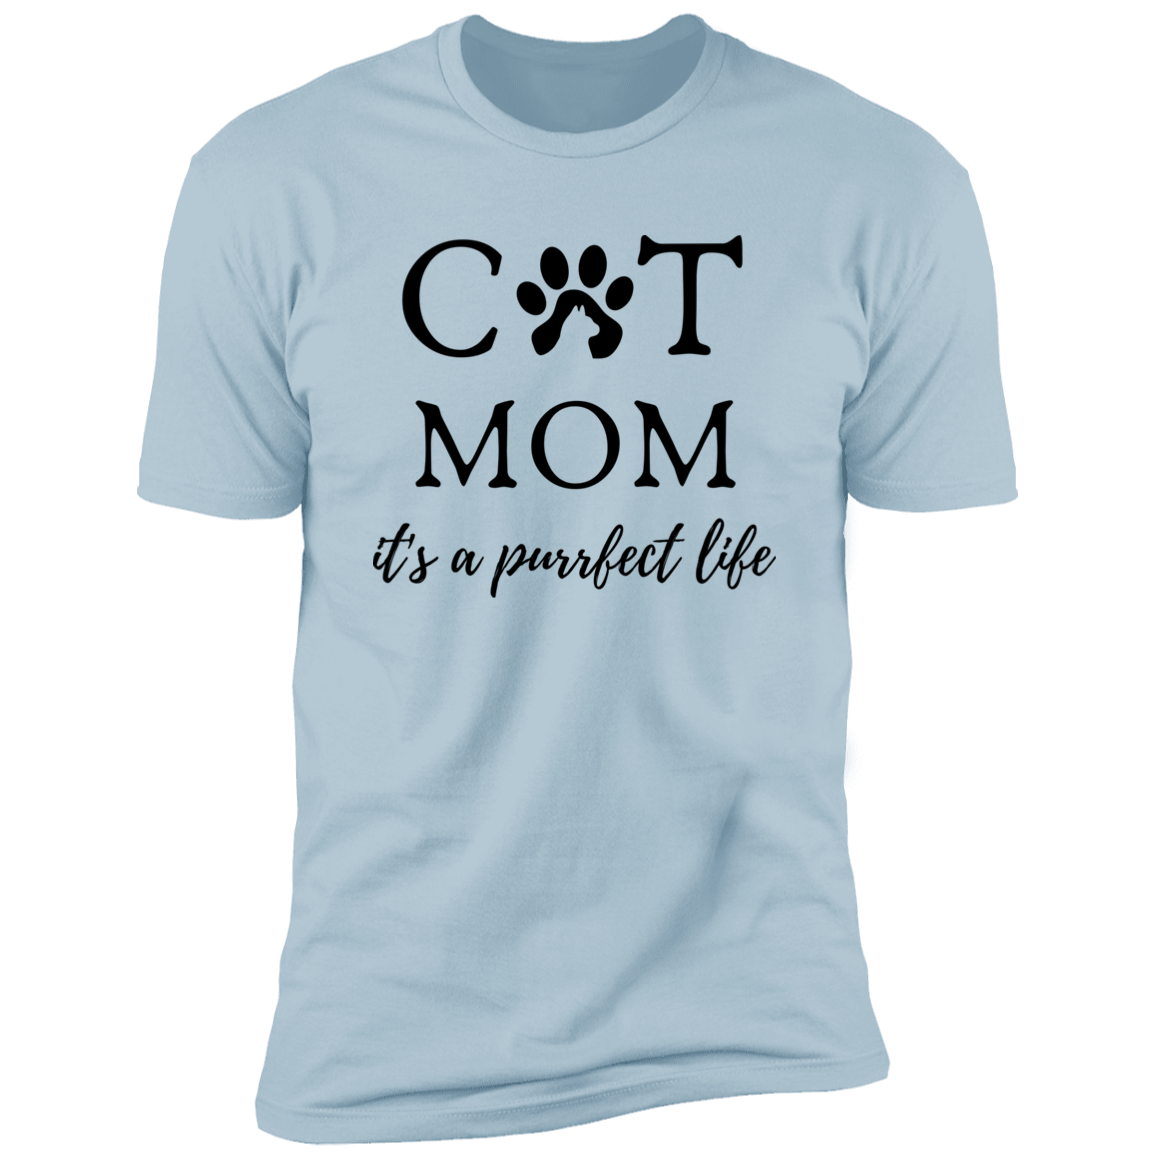 Cat Mom It's a Purrfect Life T-shirt, Cat Mom Shirt for humans, in light blue